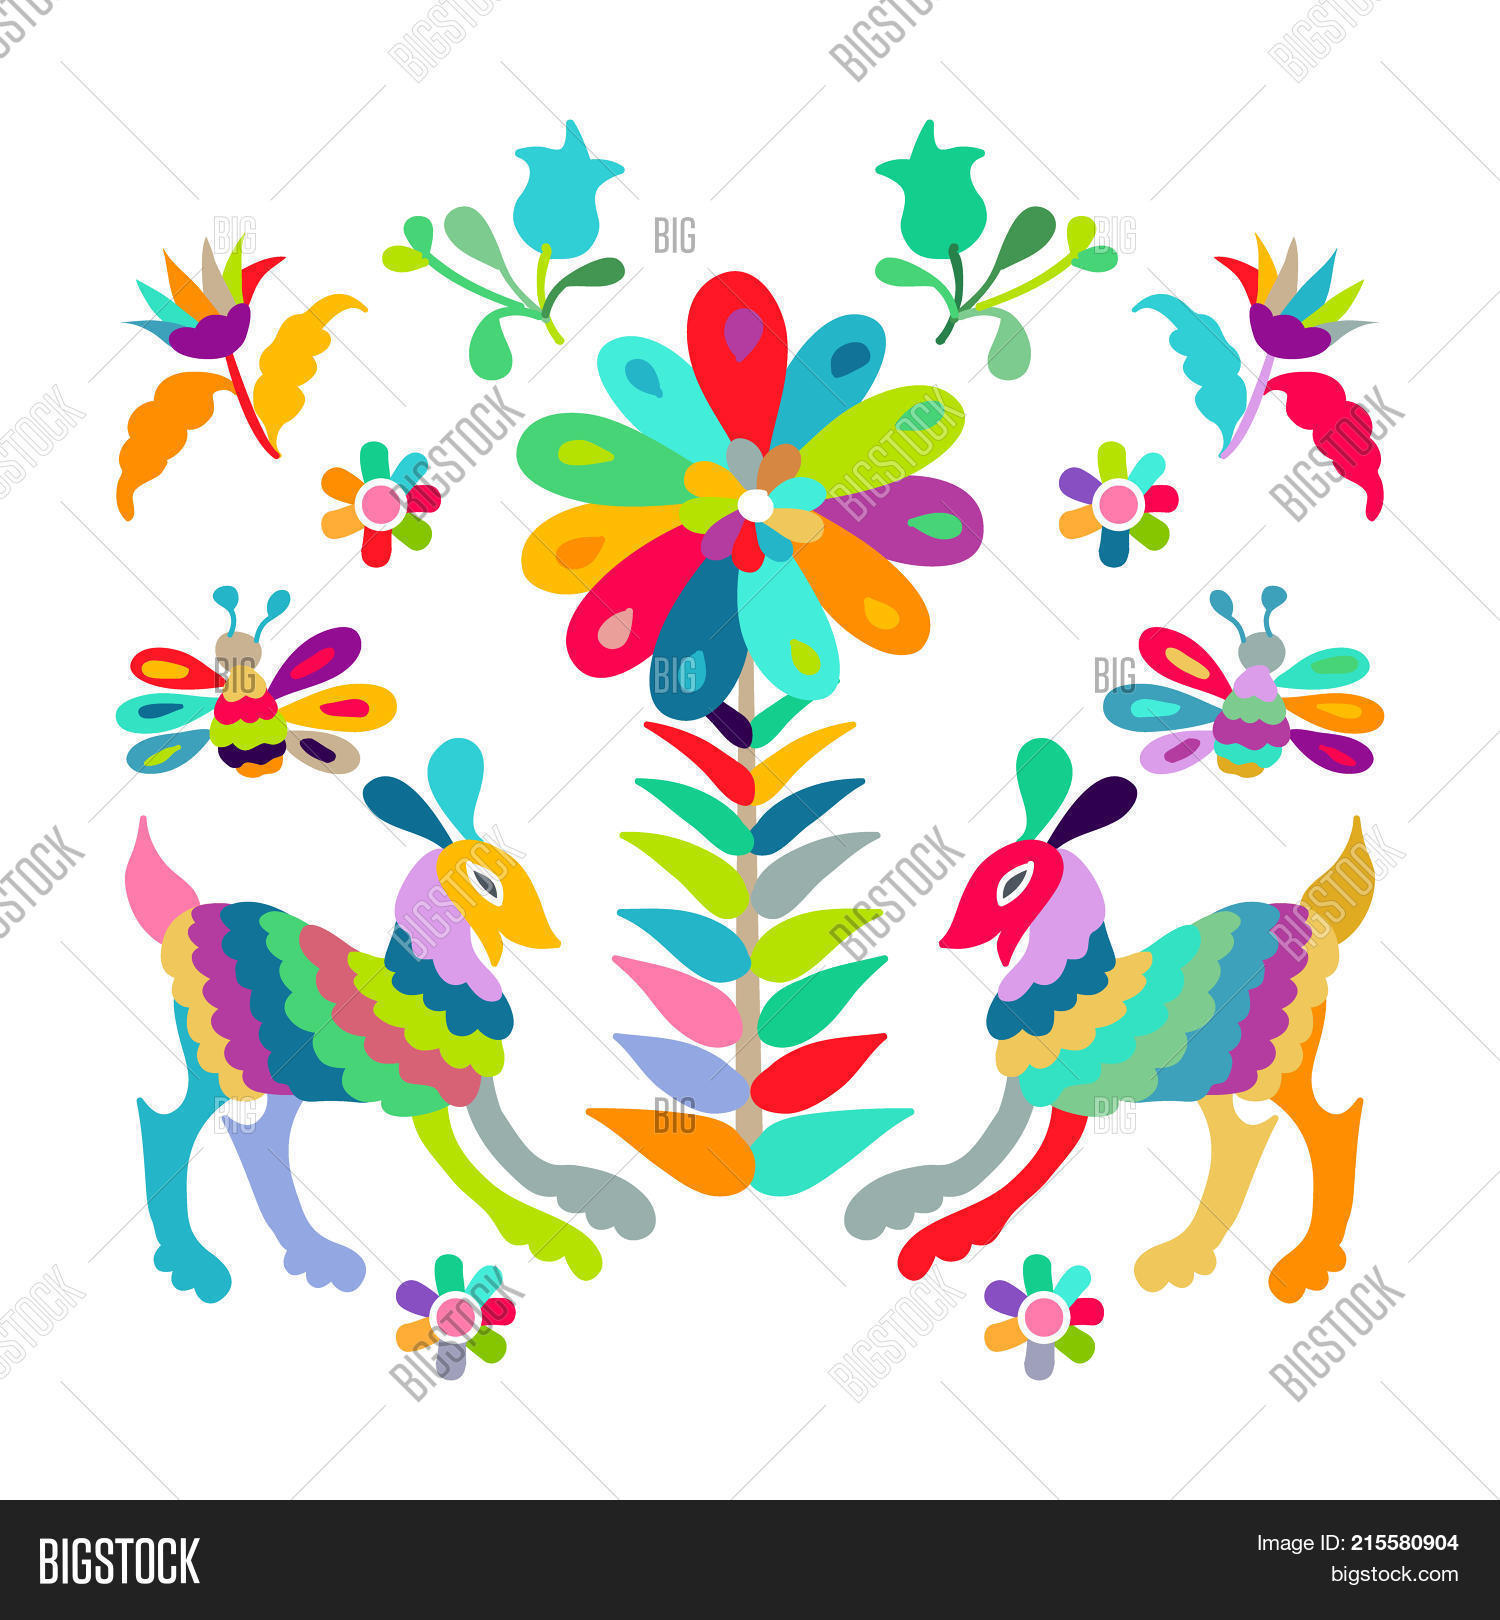 Mexican Embroidery Pattern Folk Mexican Otomi Embroidery Pattern Eps 10 Image Cg2p15580904c